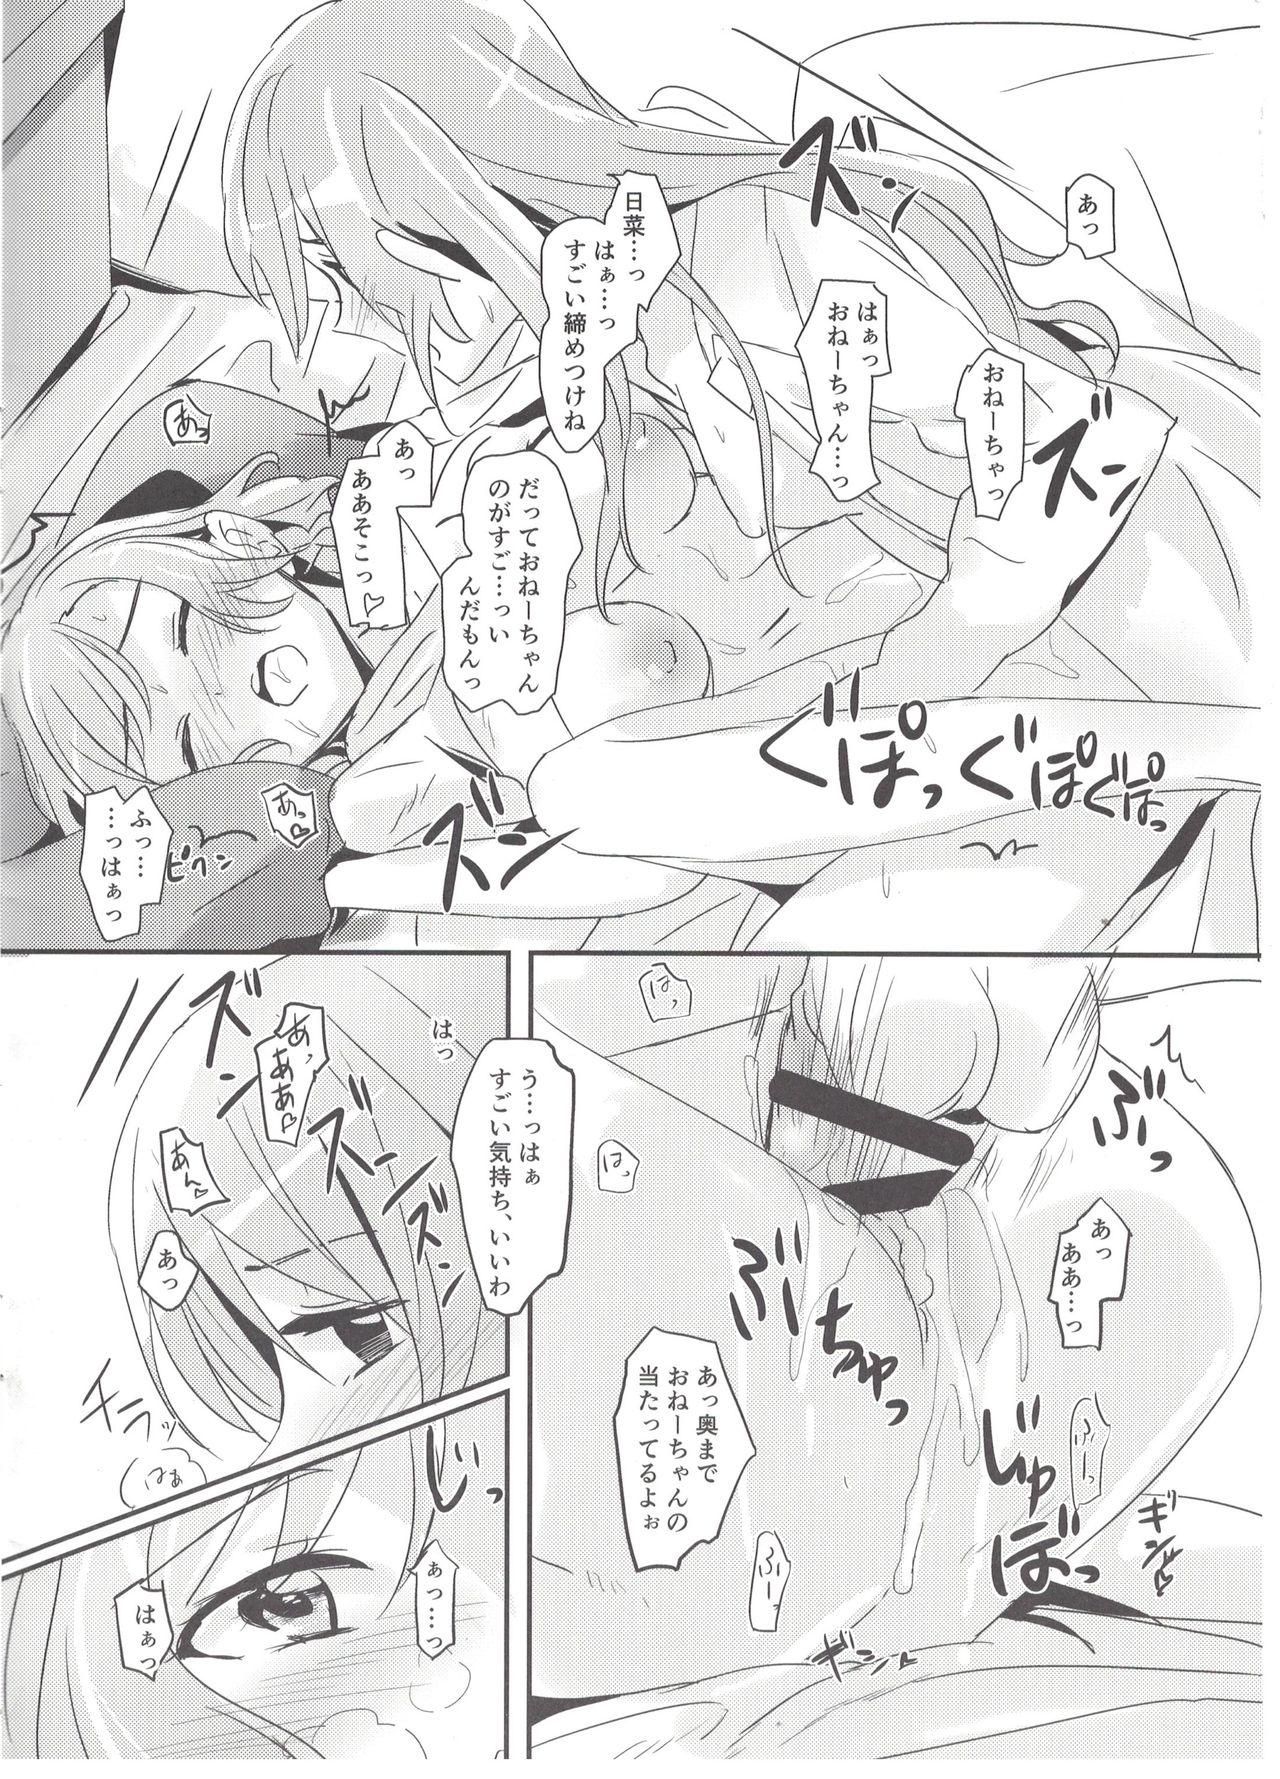 Ass To Mouth AM:0 - Bang dream Aunt - Page 5